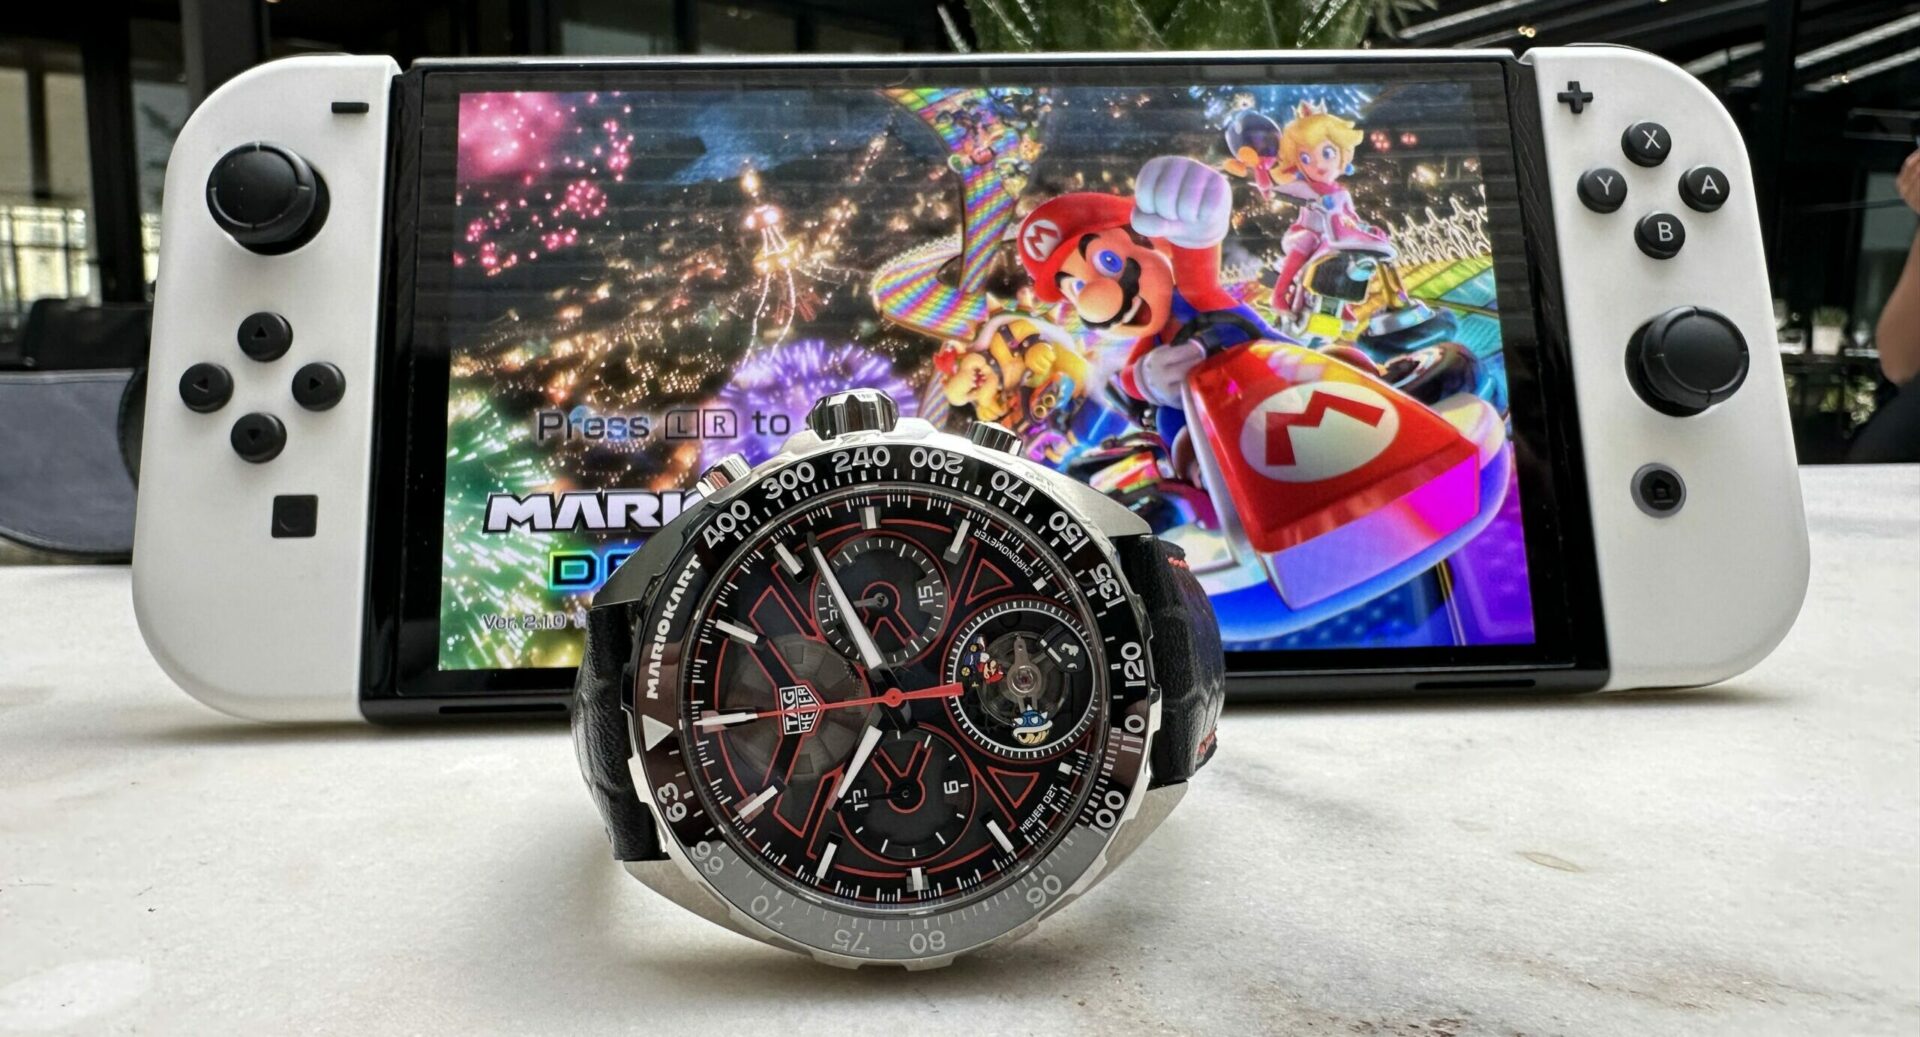 This Mario Kart-inspired TAG Heuer watch is the collab of 2022